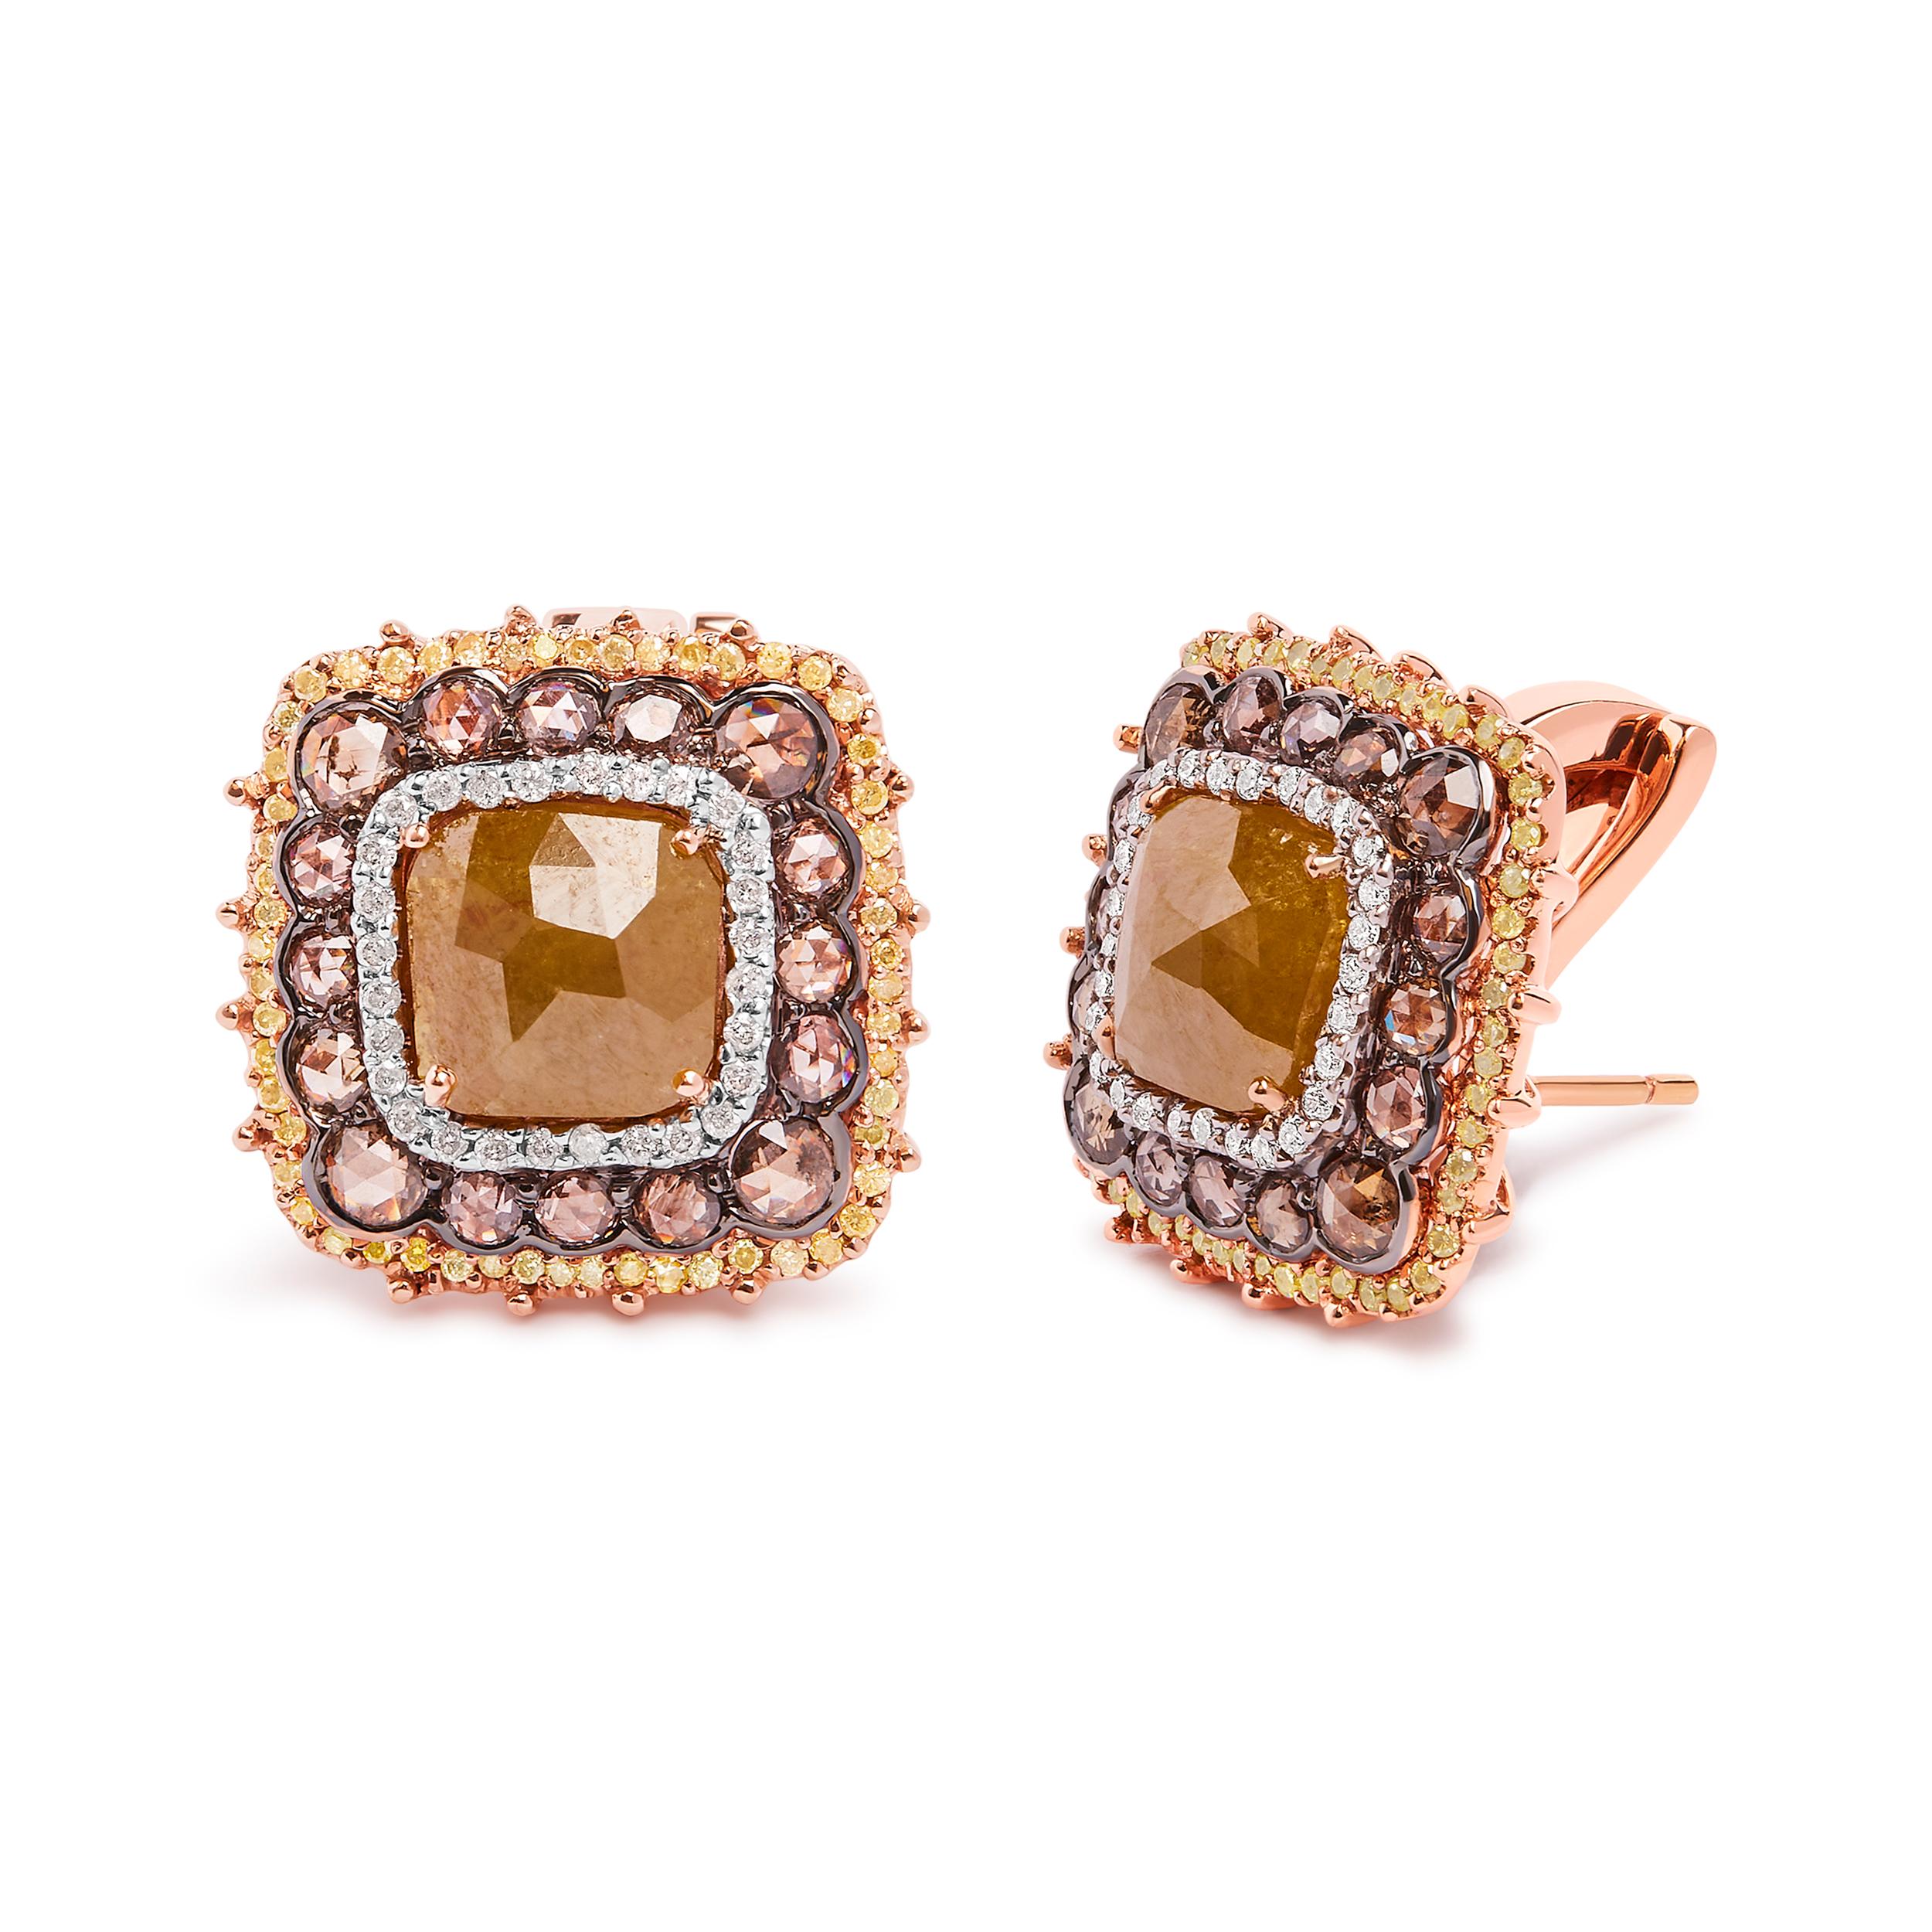 Introducing a captivating masterpiece that will adorn your ears with unparalleled elegance. Crafted in 14K rose gold, these stud earrings showcase the enchanting beauty of fancy rose cut diamonds. With a remarkable 6.00 cttw, these precious gems are